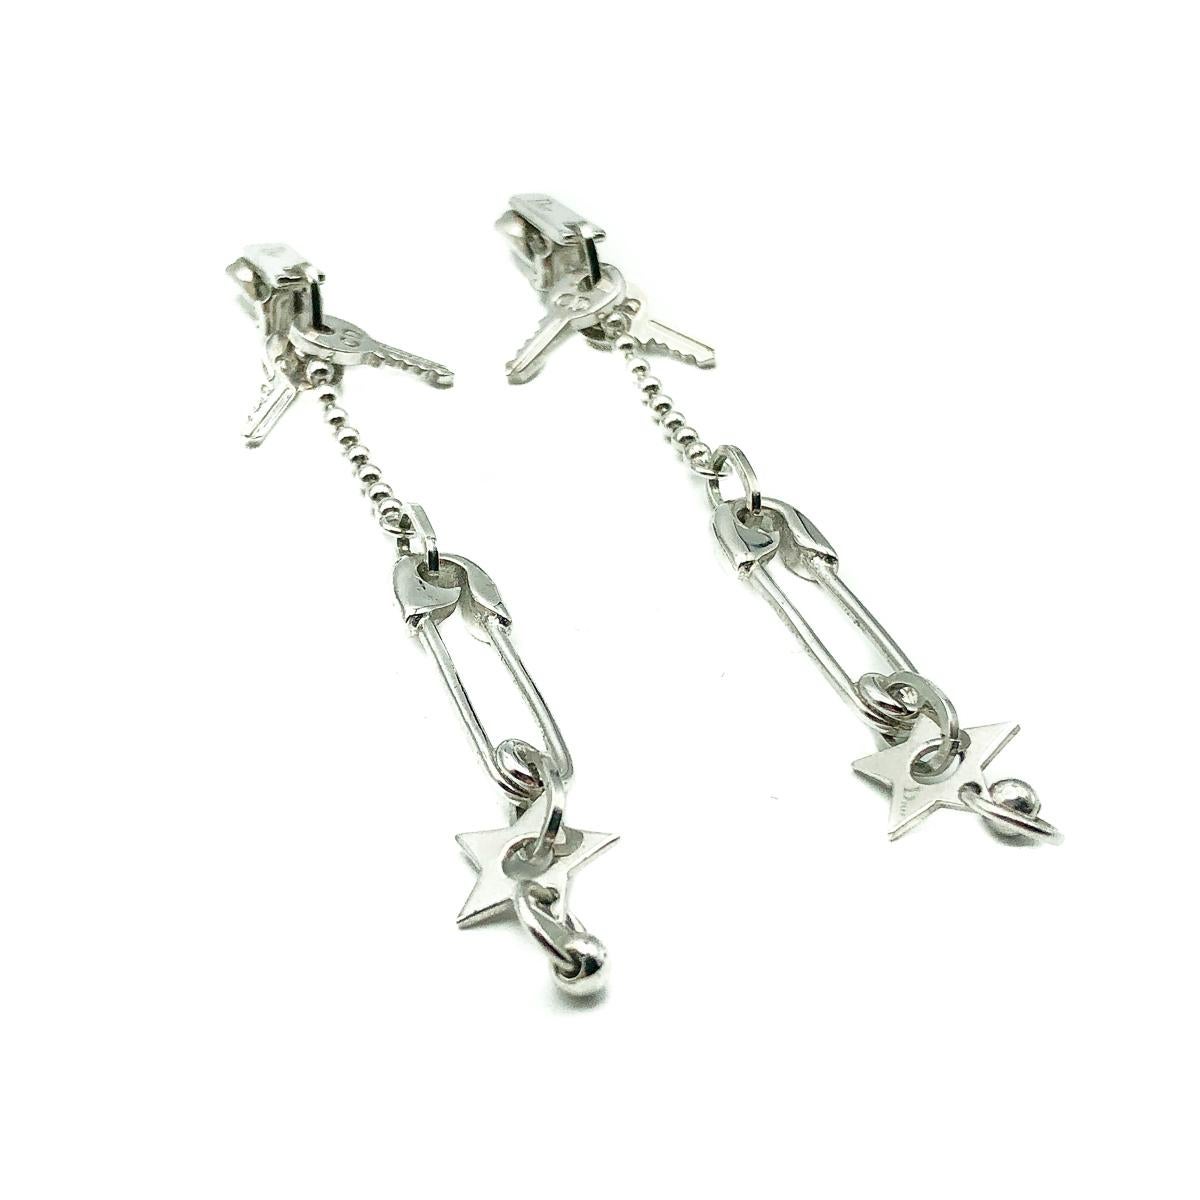 Fun and funky, Christian Dior Safety Pin Earrings from the Galliano era. Crafted in rhodium plated metal. Featuring emblems of the house and collections of the time; safety pins, logo keys and stars. In very good vintage condition, signed, approx.